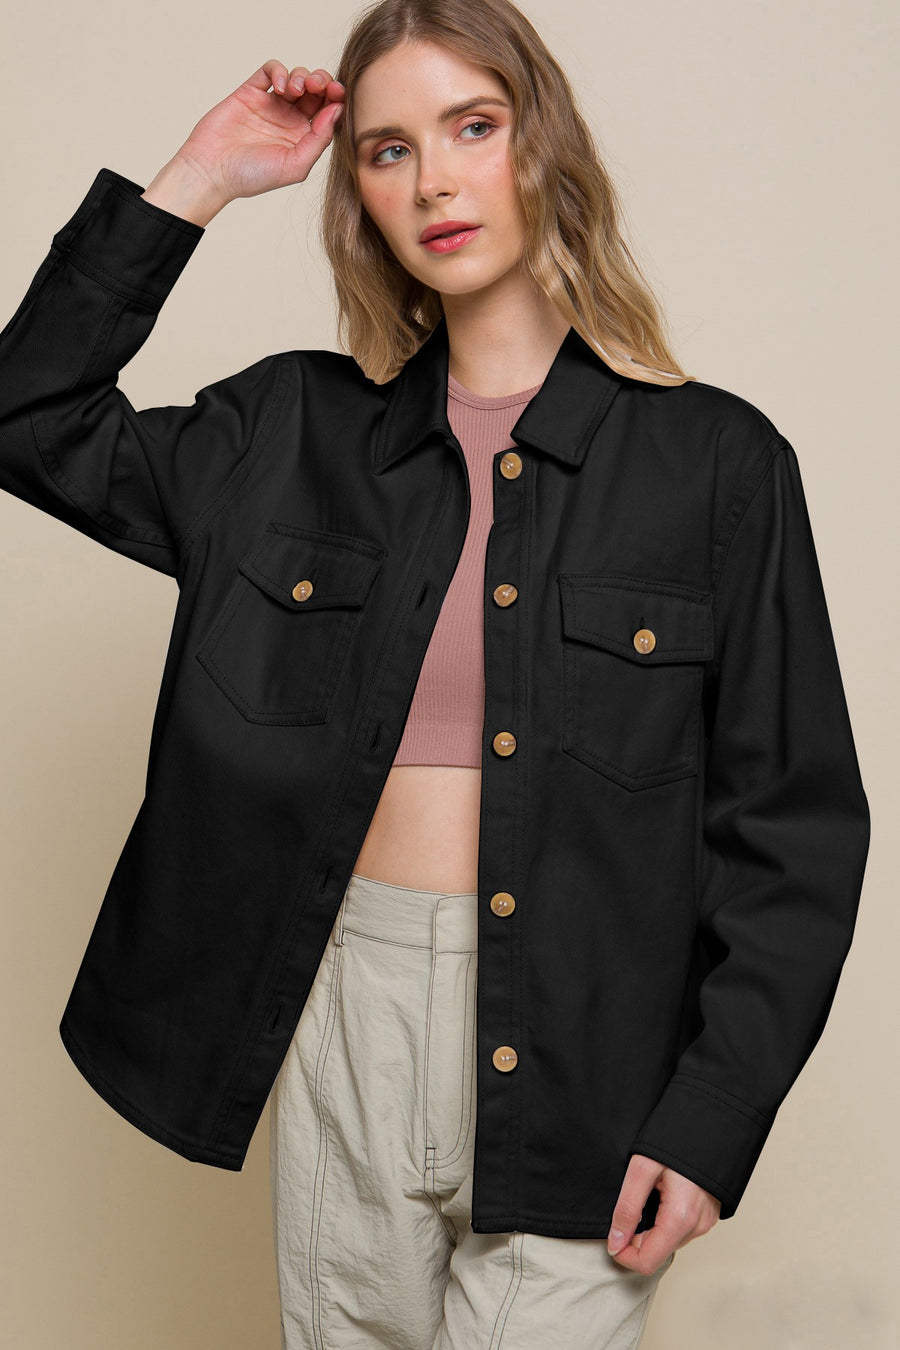 Featuring a longsleeve button up jacket with two front pockets in the color black